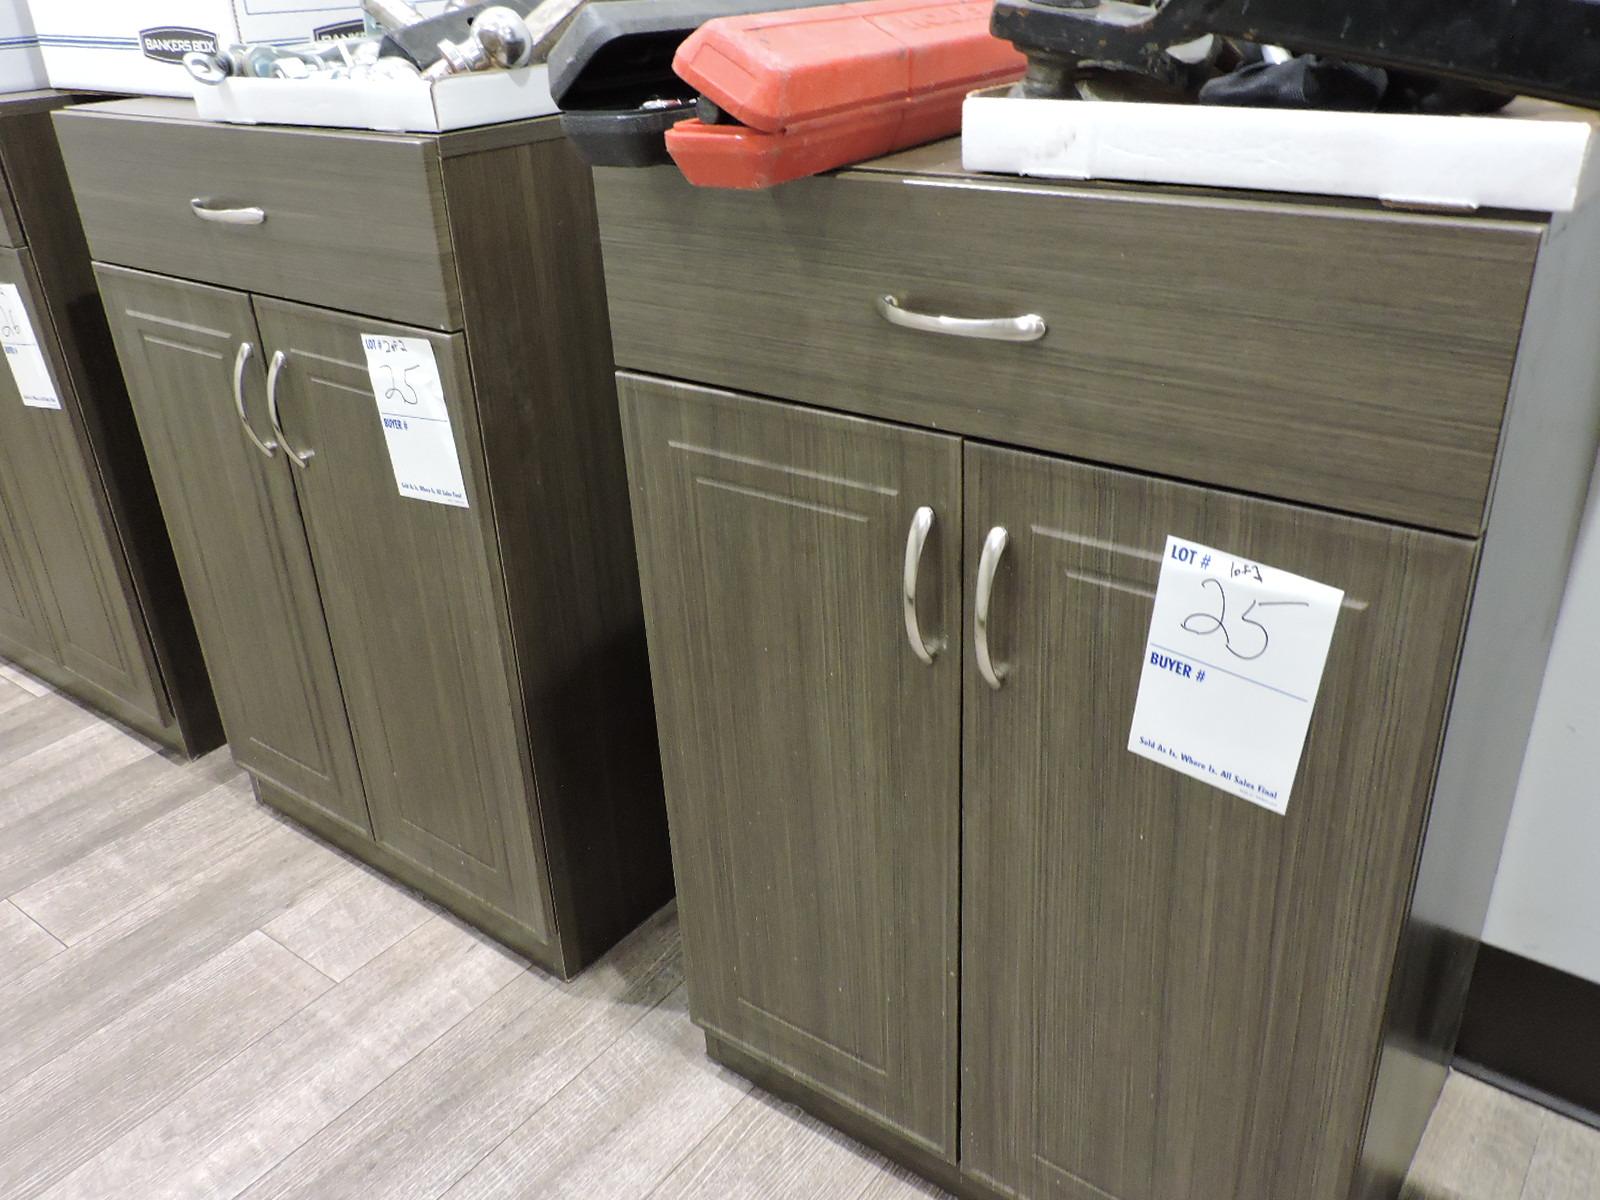 Pair of Low Utility Cabinets  23.5" W X 16.5" D X 34" Tall